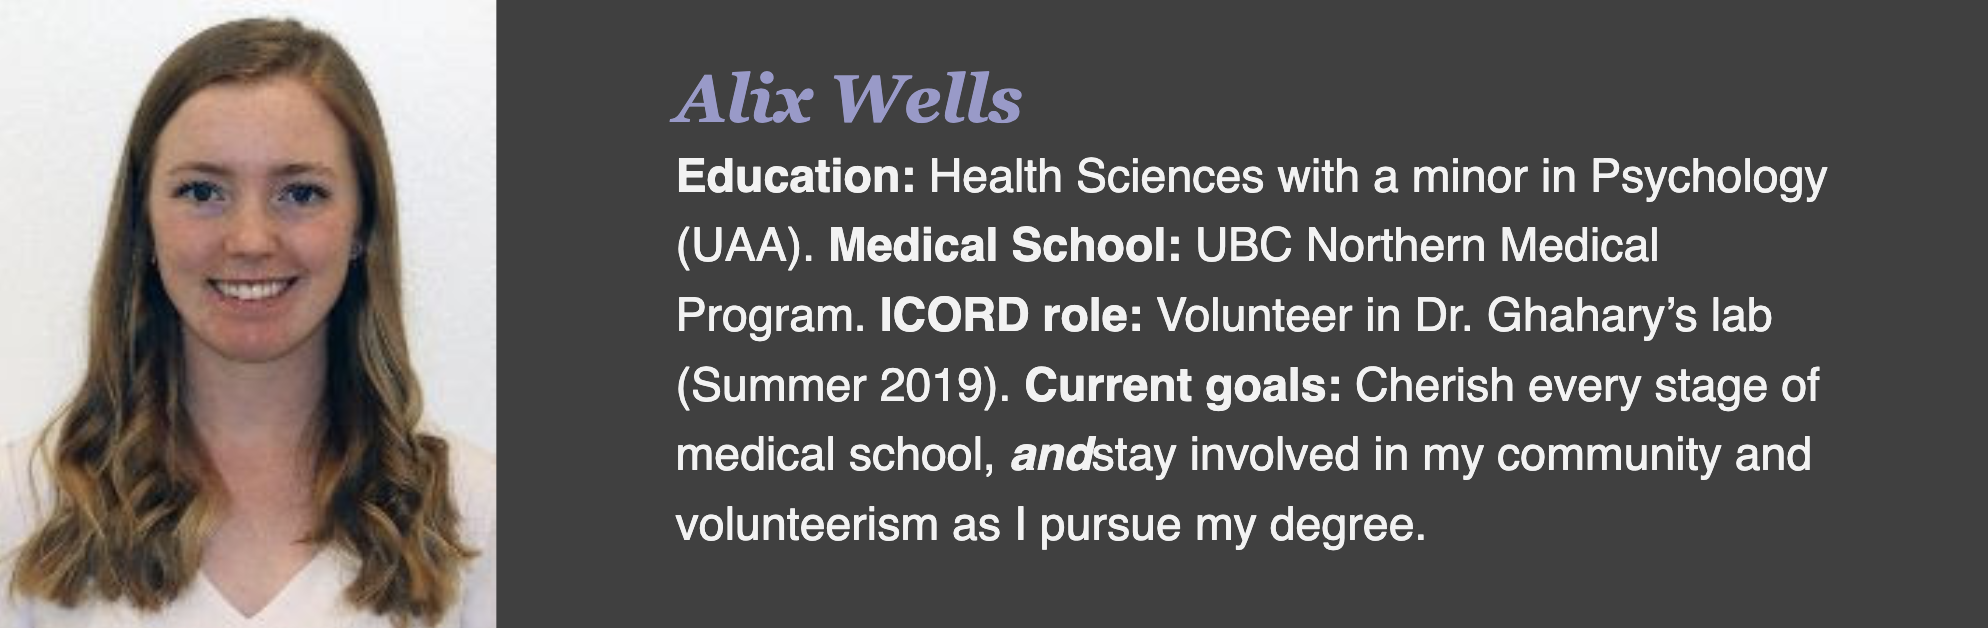 Alix Wells Education: Health Sciences with a minor in Psychology (UAA). Medical School: UBC Northern Medical Program. ICORD role: Volunteer in Dr. Ghahary’s lab (Summer 2019). Current goals: Cherish every stage of medical school, andstay involved in my community and volunteerism as I pursue my degree.